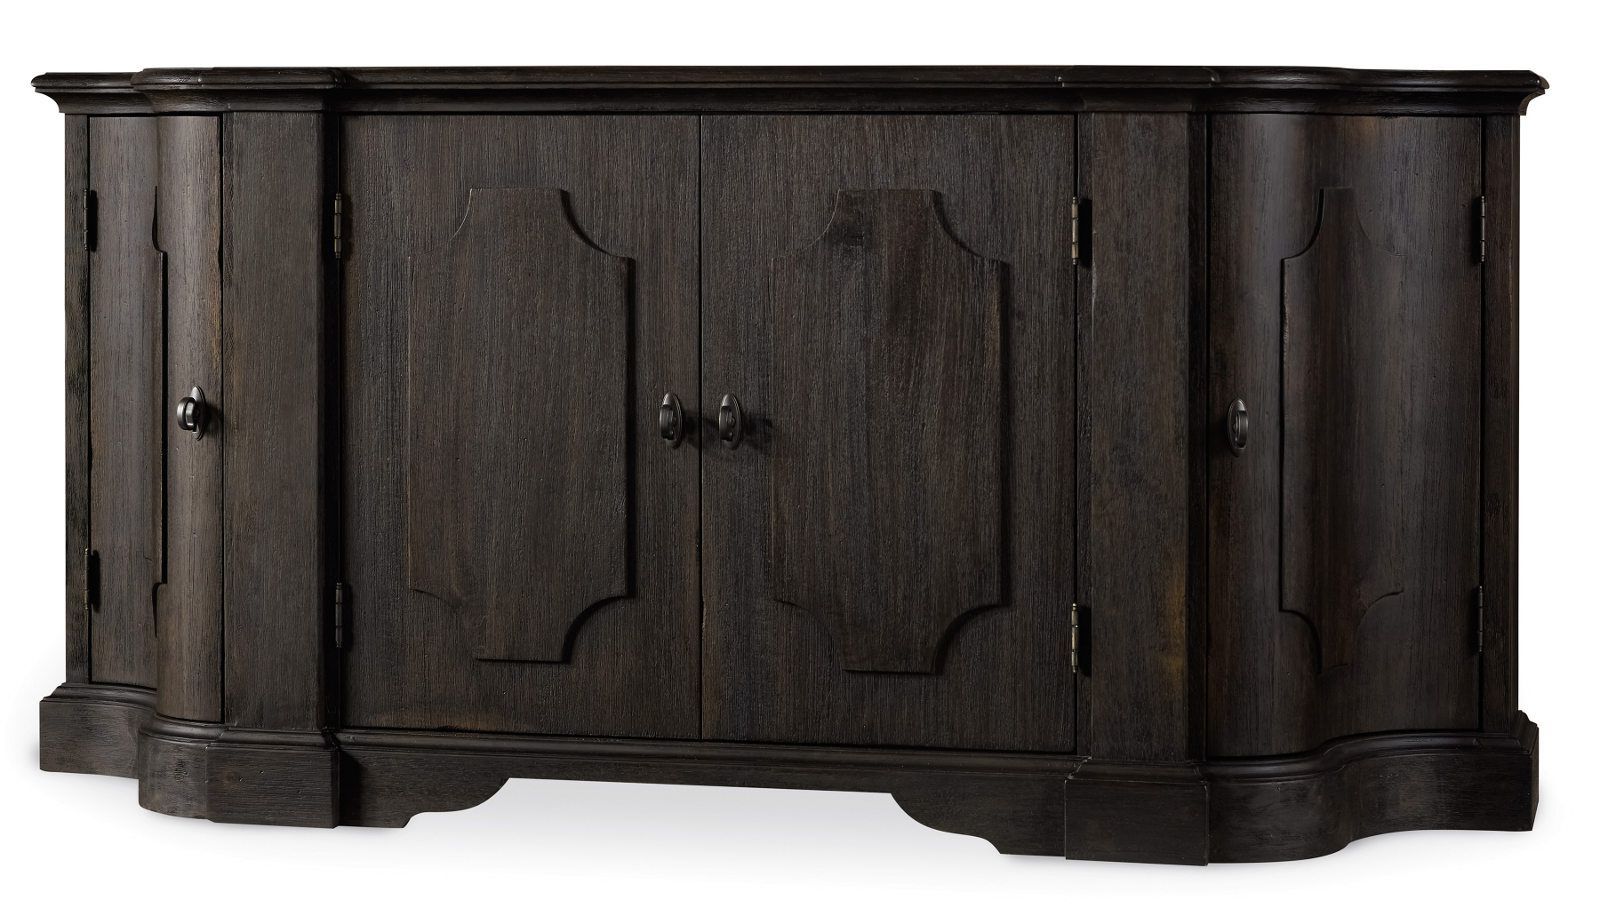 2019 Hooker Furniture Corsica Credenza 5280 75900dining Rooms With Regard To Melange Brockton Sideboards (View 15 of 20)